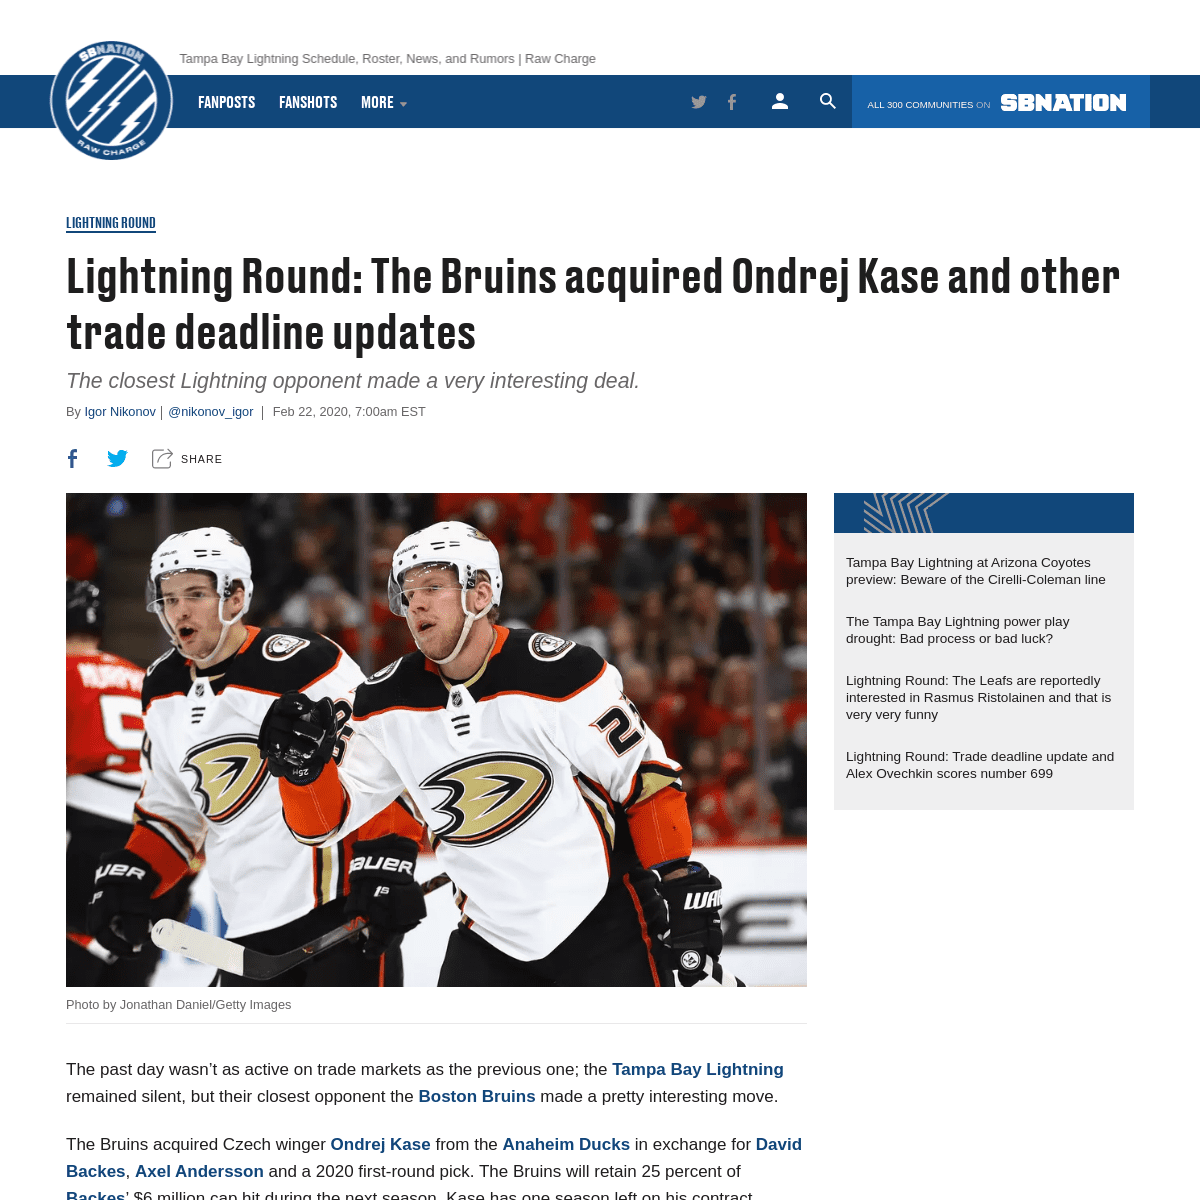 A complete backup of www.rawcharge.com/2020/2/22/21148299/lightning-round-the-bruins-acquired-ondrej-kase-and-other-trade-deadli